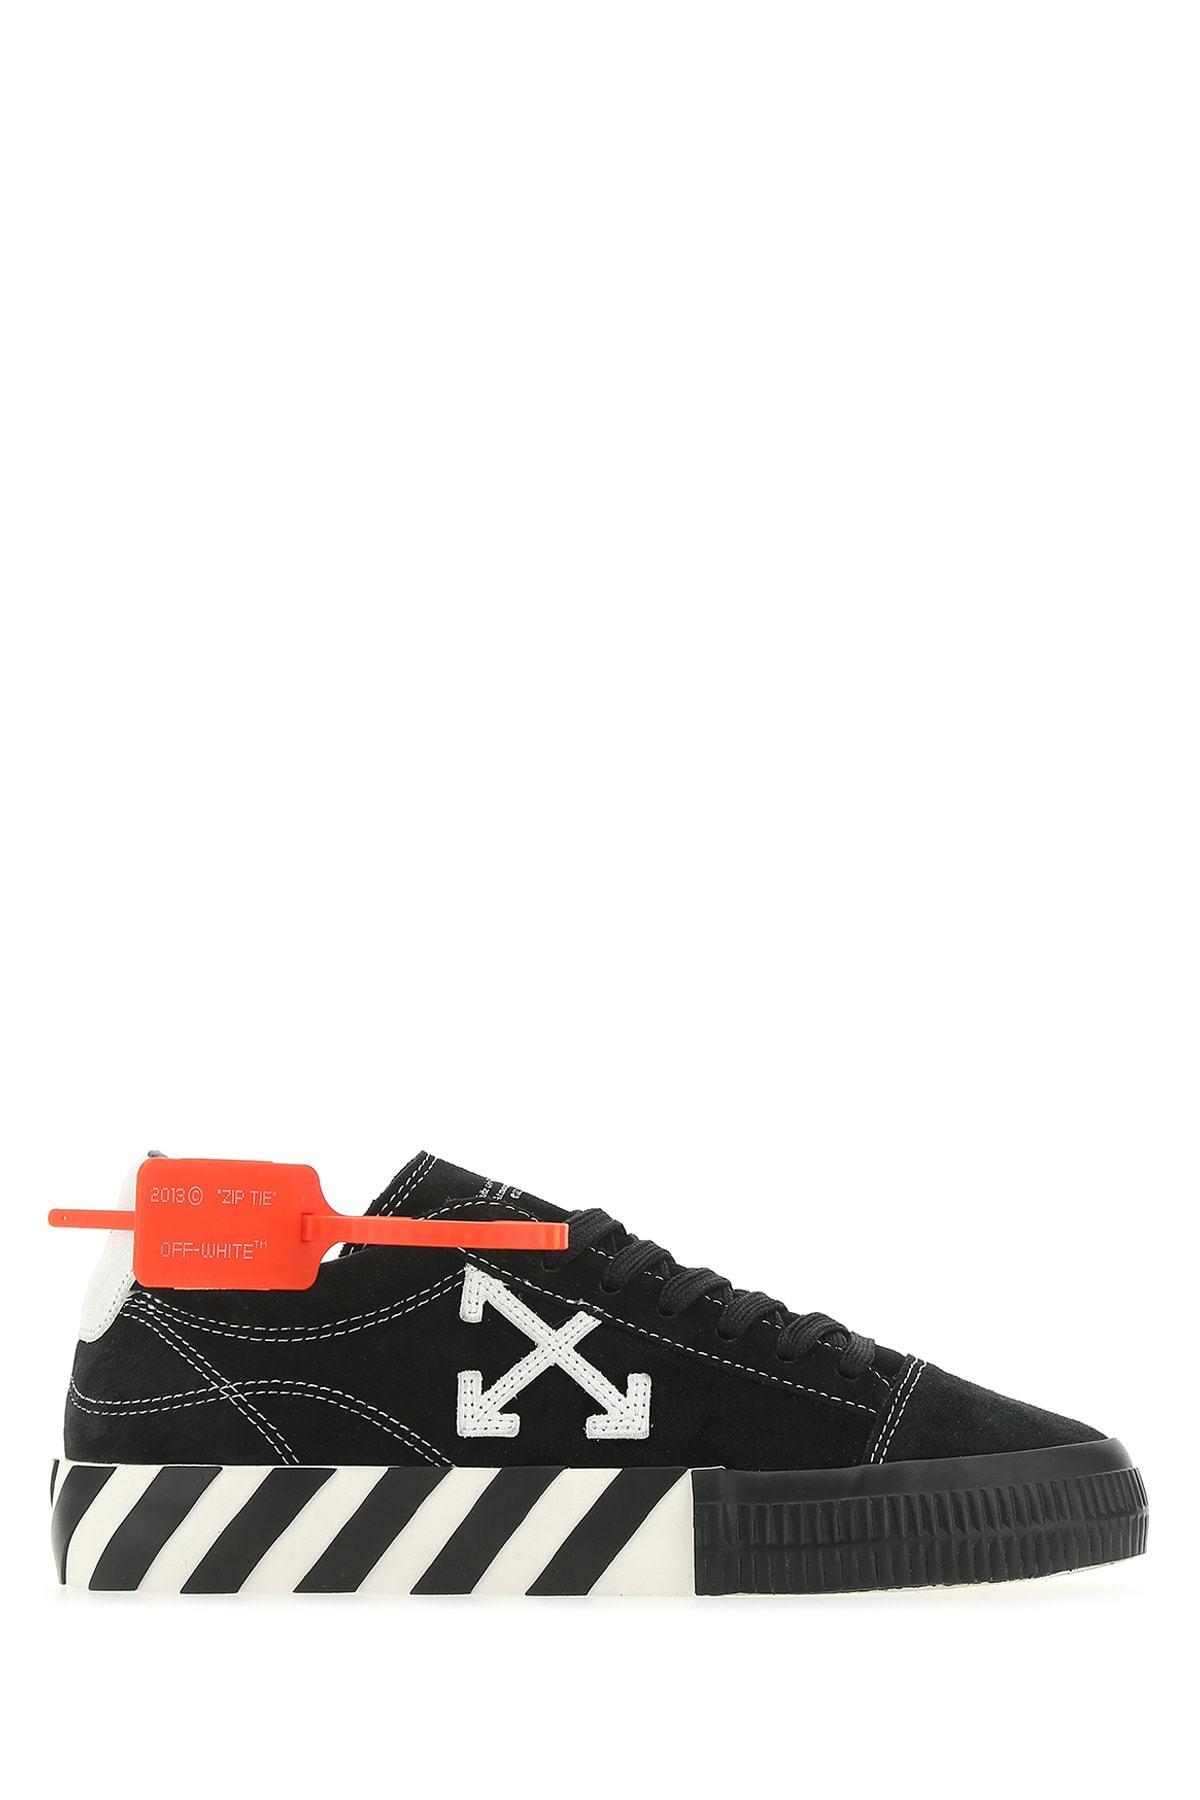 Off-White c/o Virgil Abloh Leather Low Vulcanized Sneakers in Black - Lyst